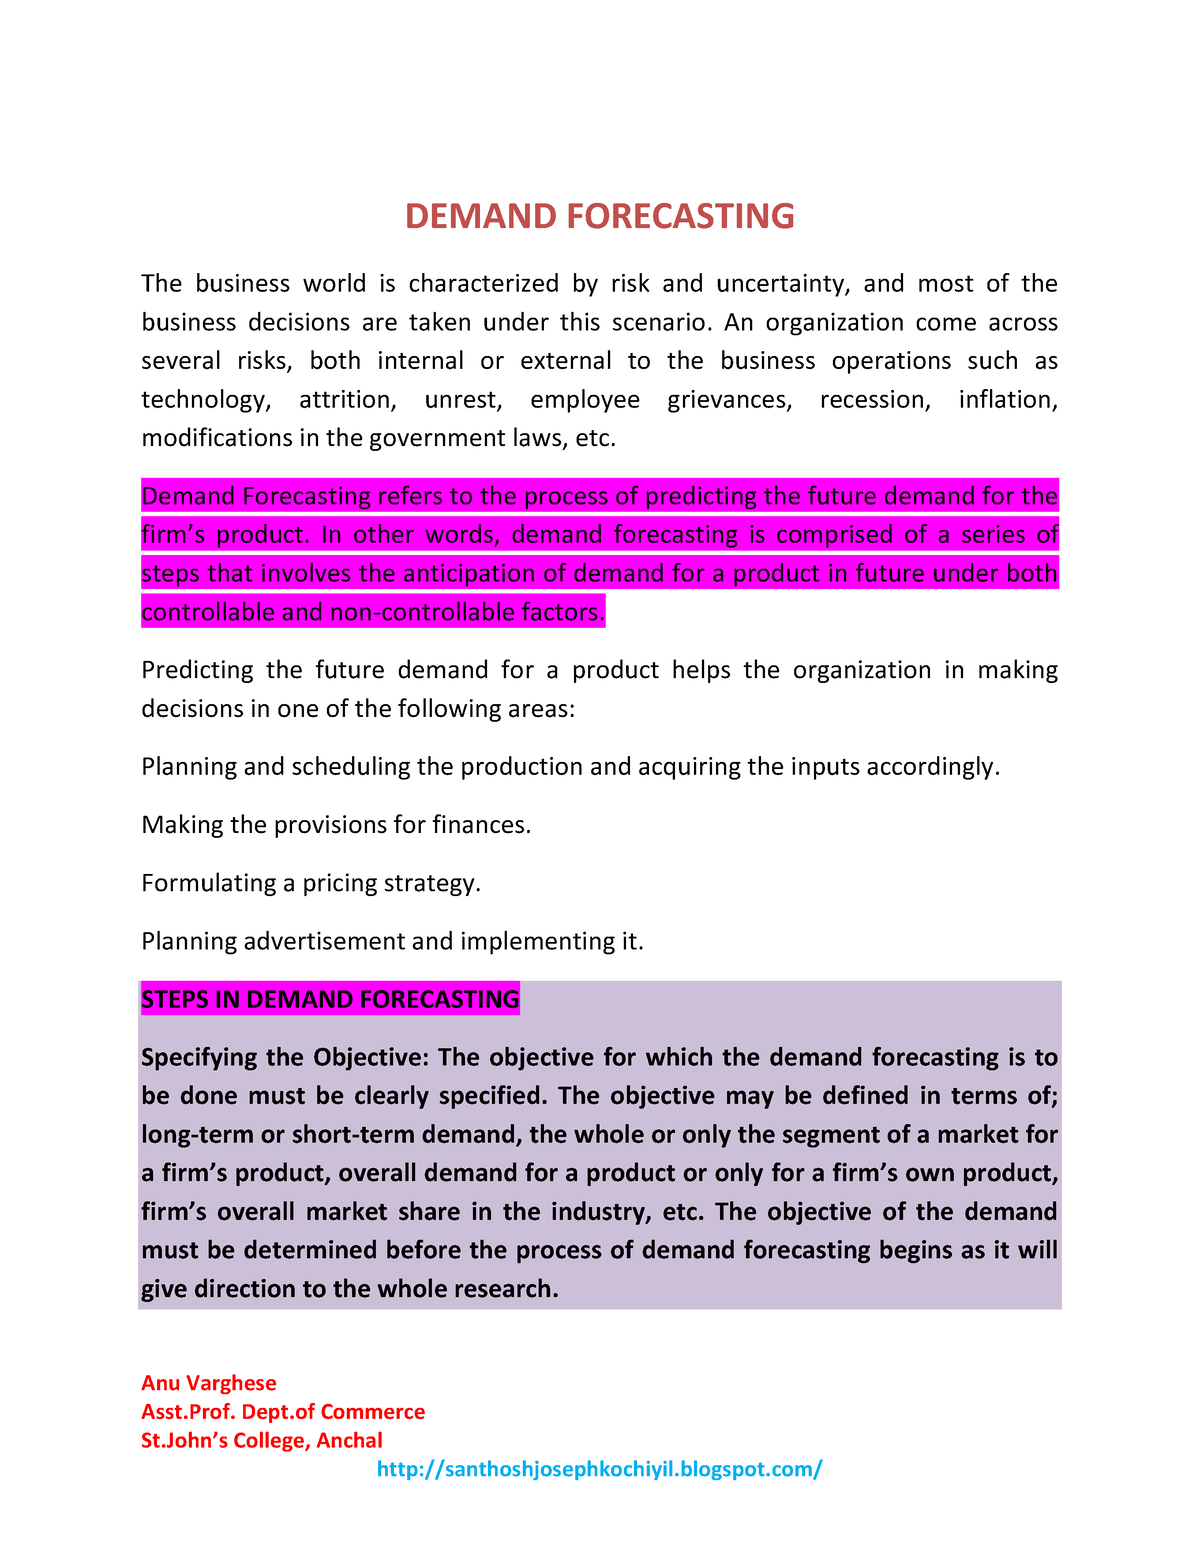 thesis on forecasting demand